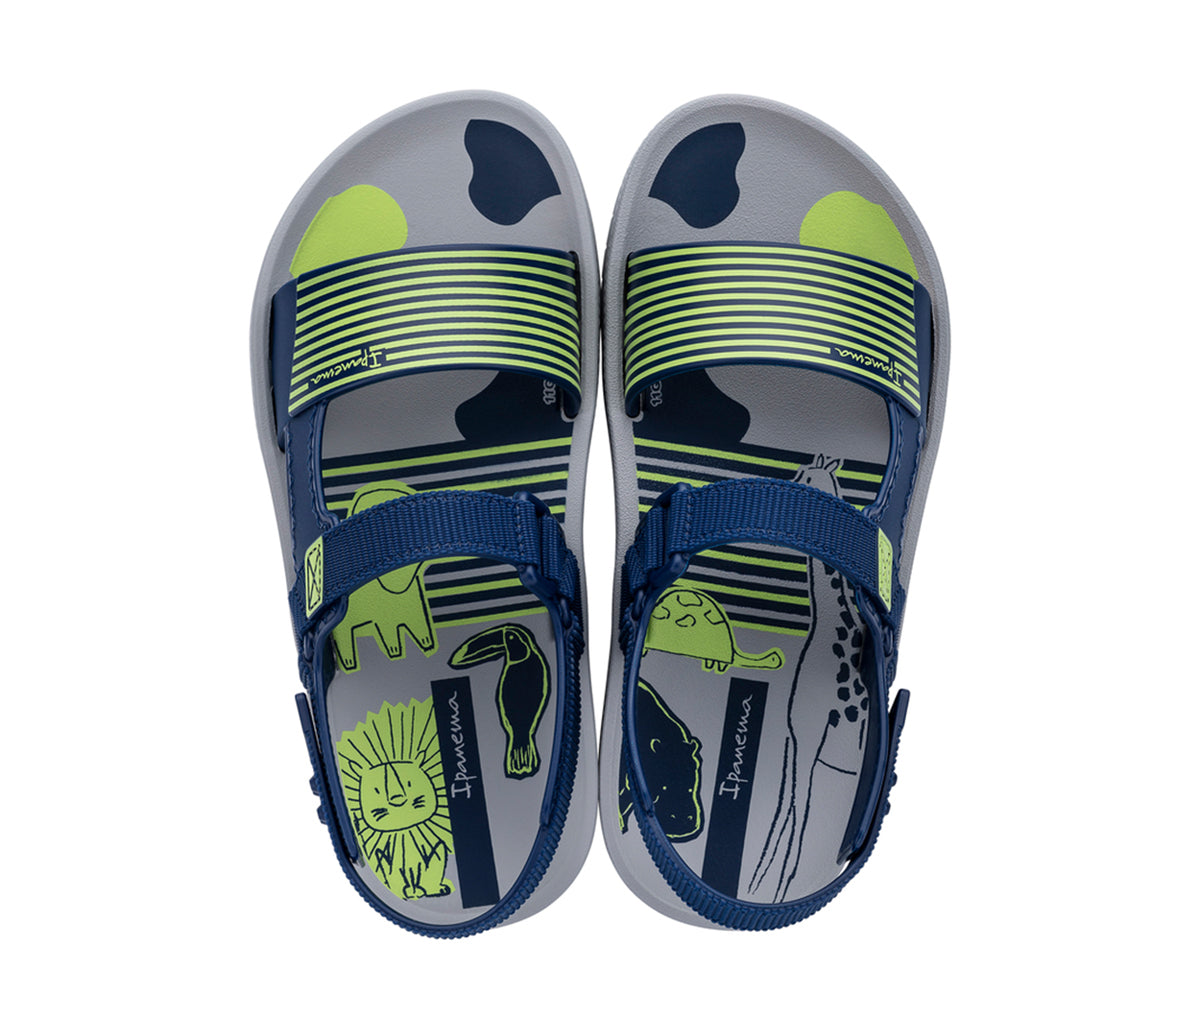 Top view of a pair of grey, blue and neon green Ipanema Recreio Papate kids Sandals.